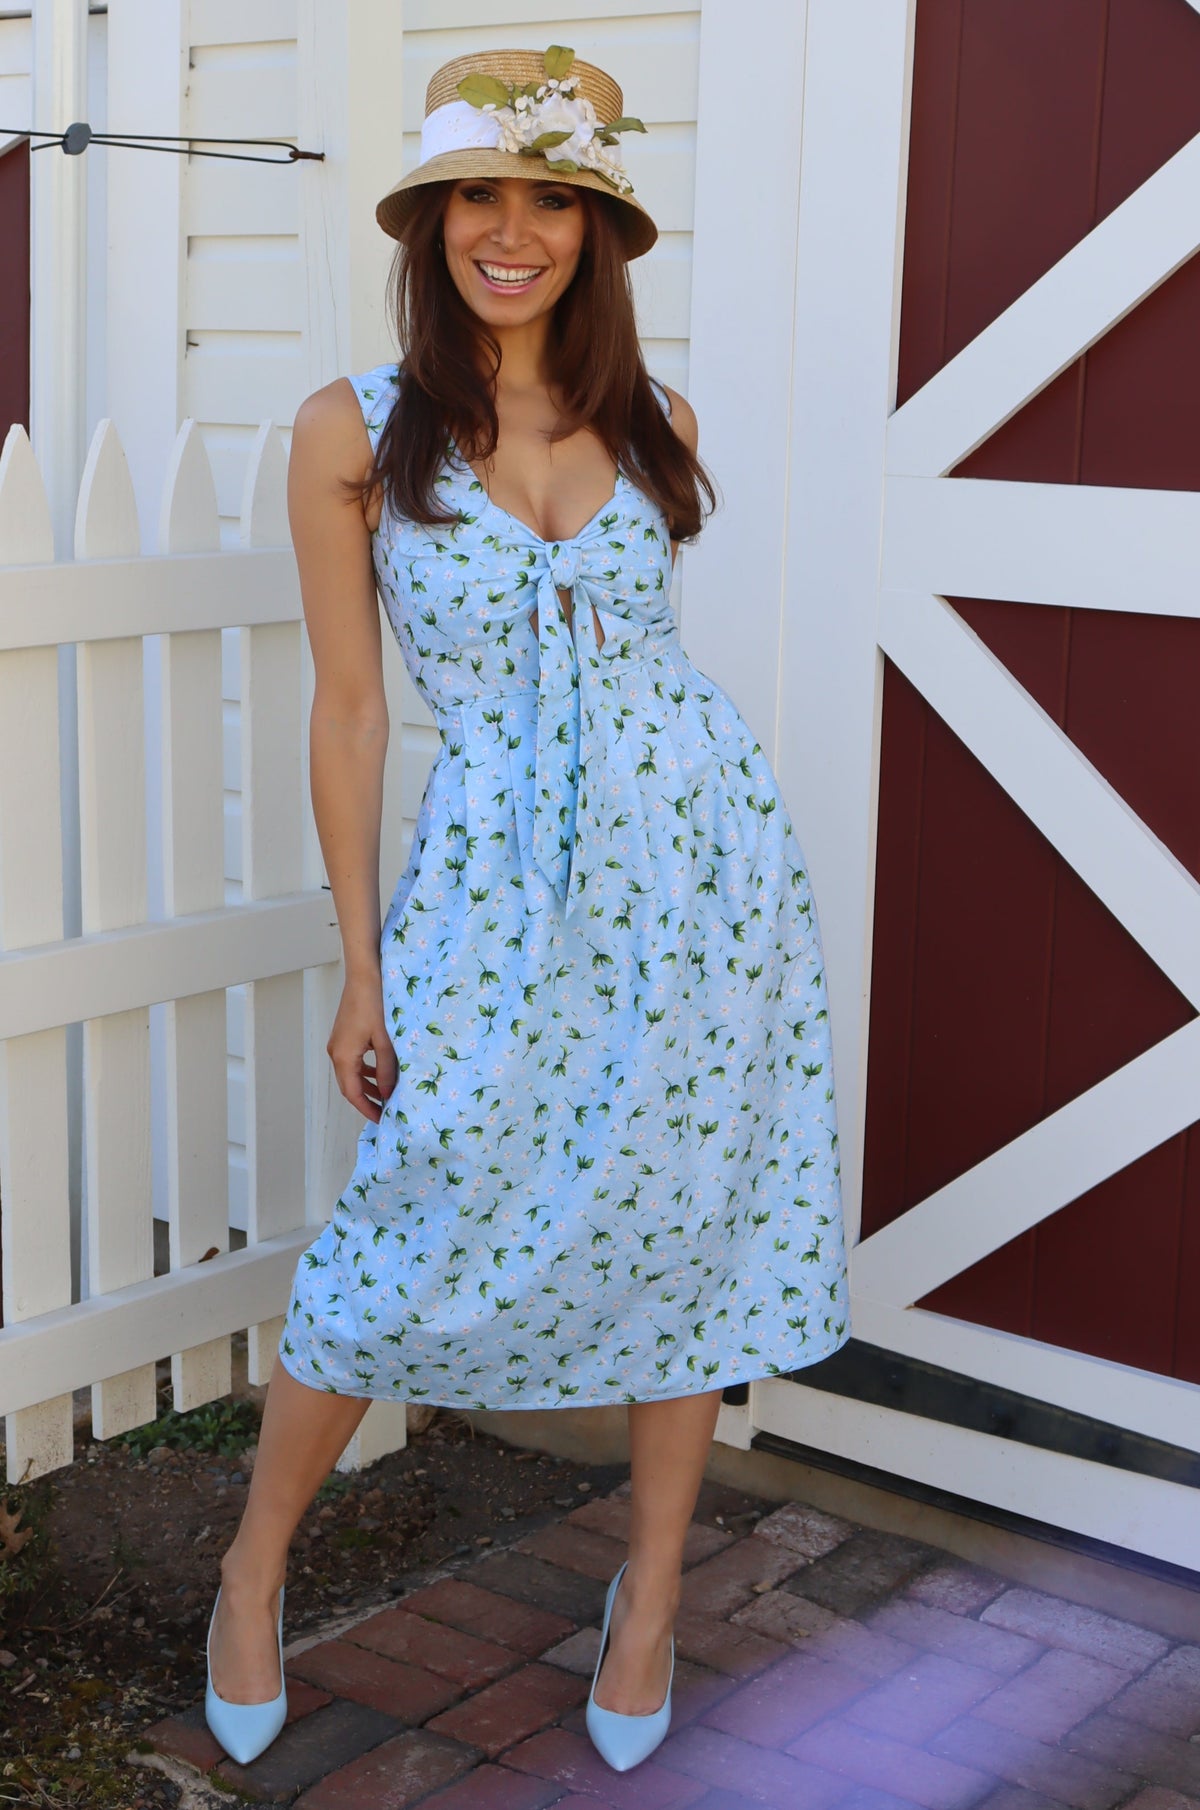 Model in wicker hat in front of barn, wearing a midi light blue dress with peek-a-boo bow front, in front of a barn.